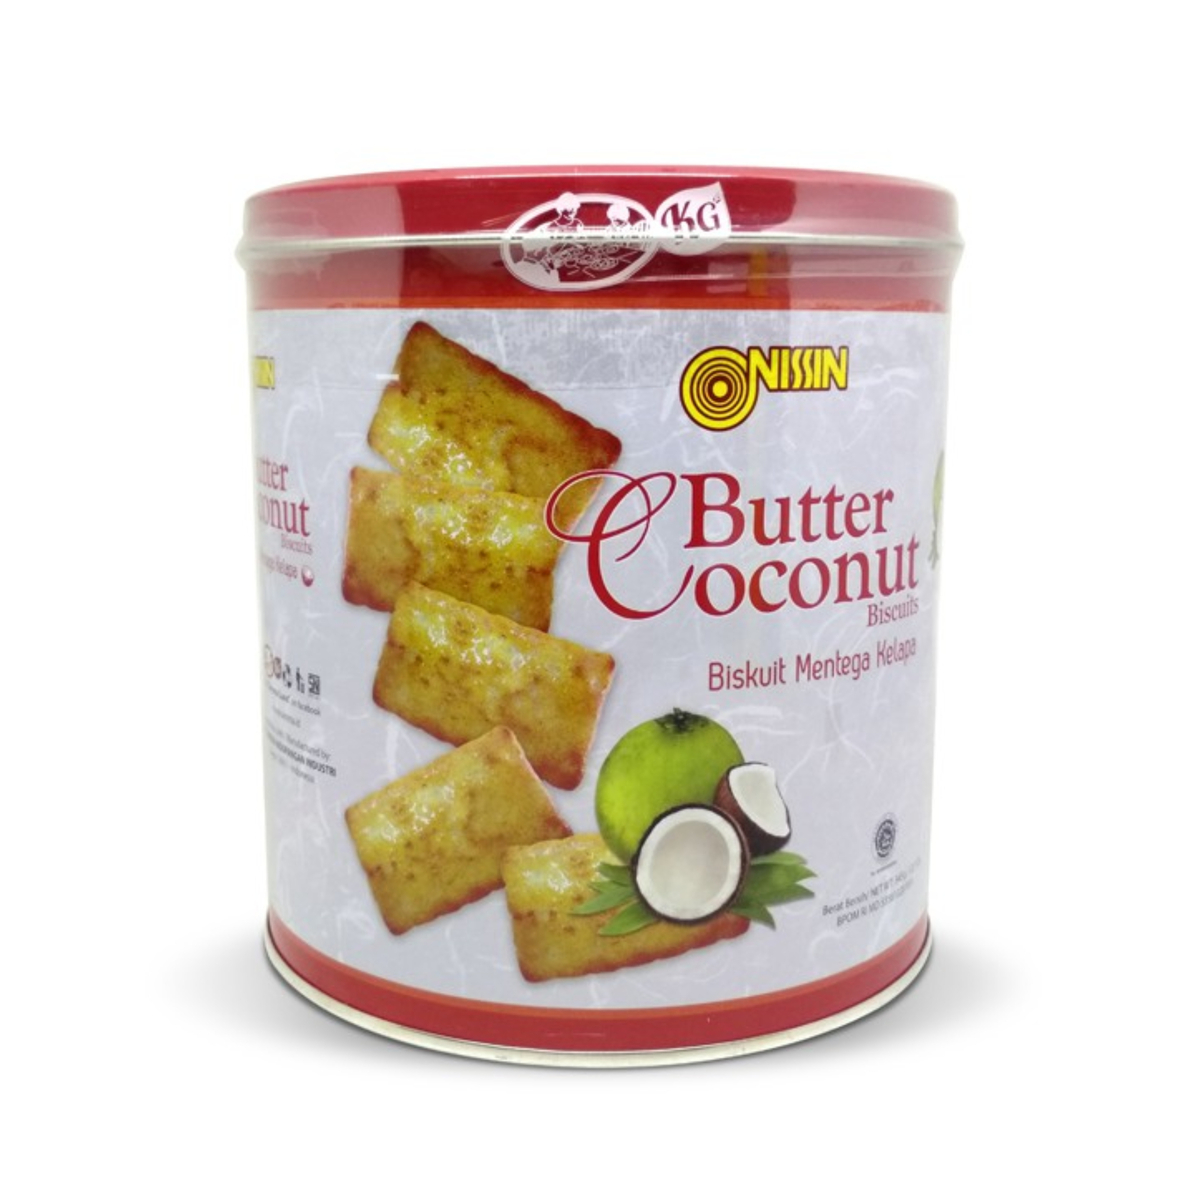 Nissin Butter Coconut Biscuit 345g